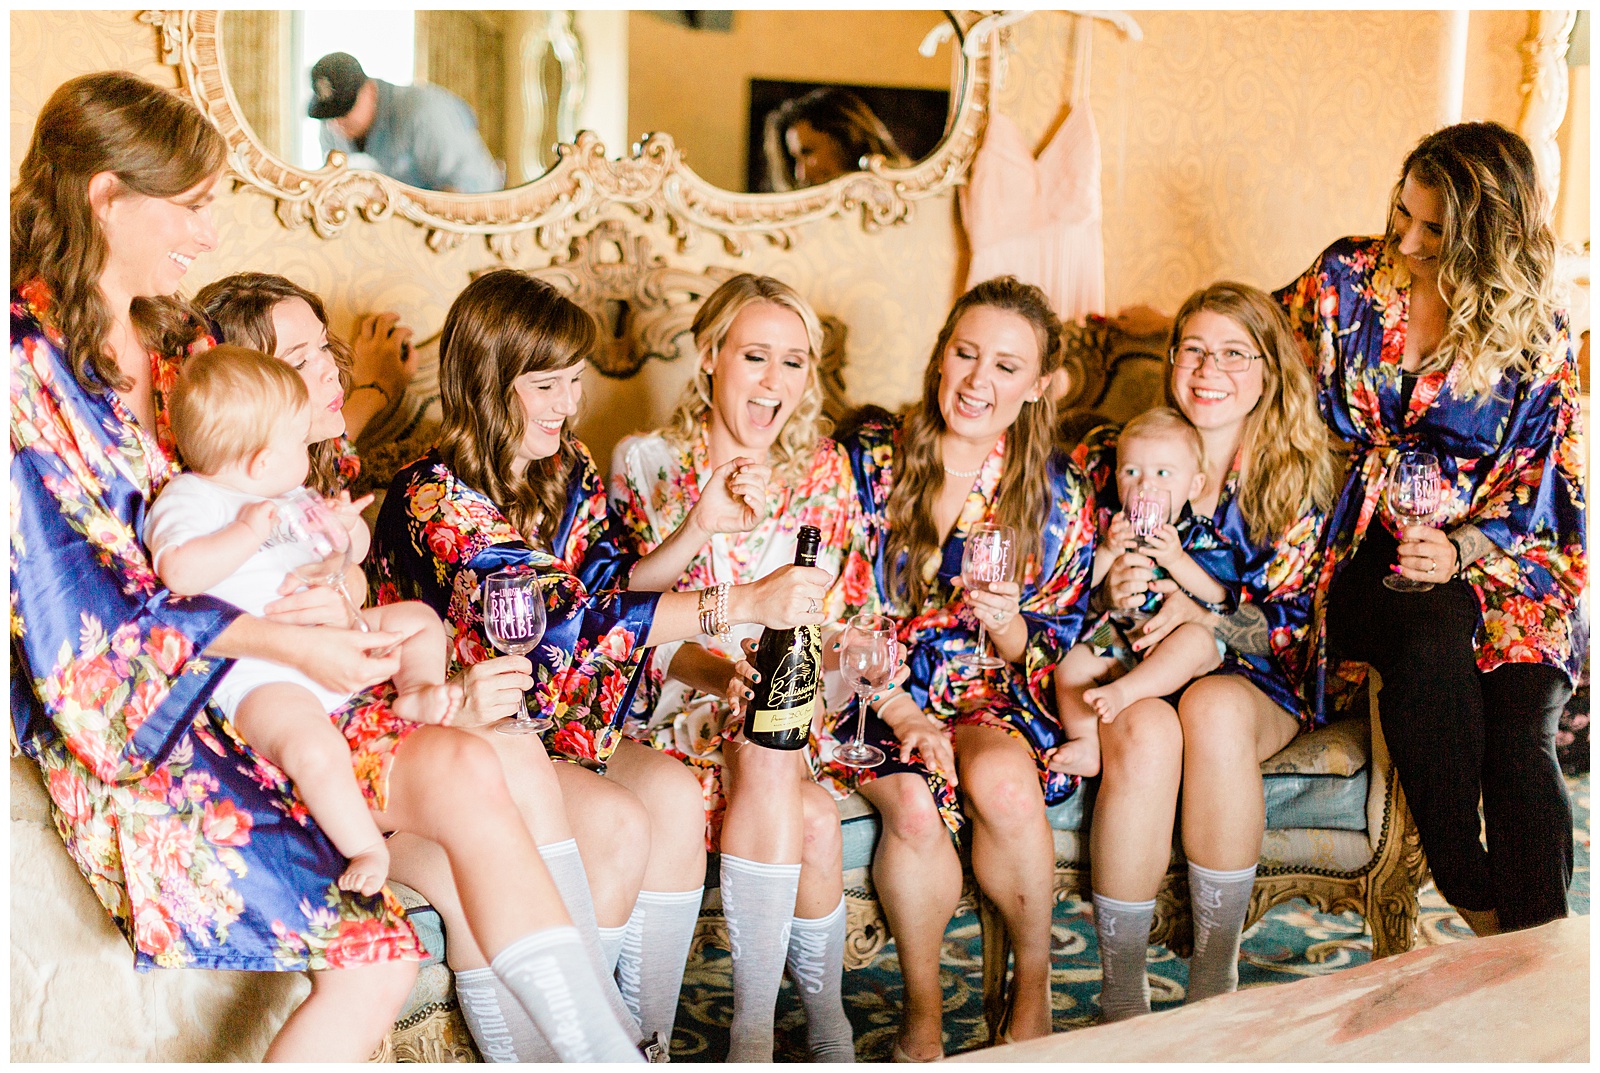 Bride and her bridesmaids celebrating with champagne before the wedding ceremony